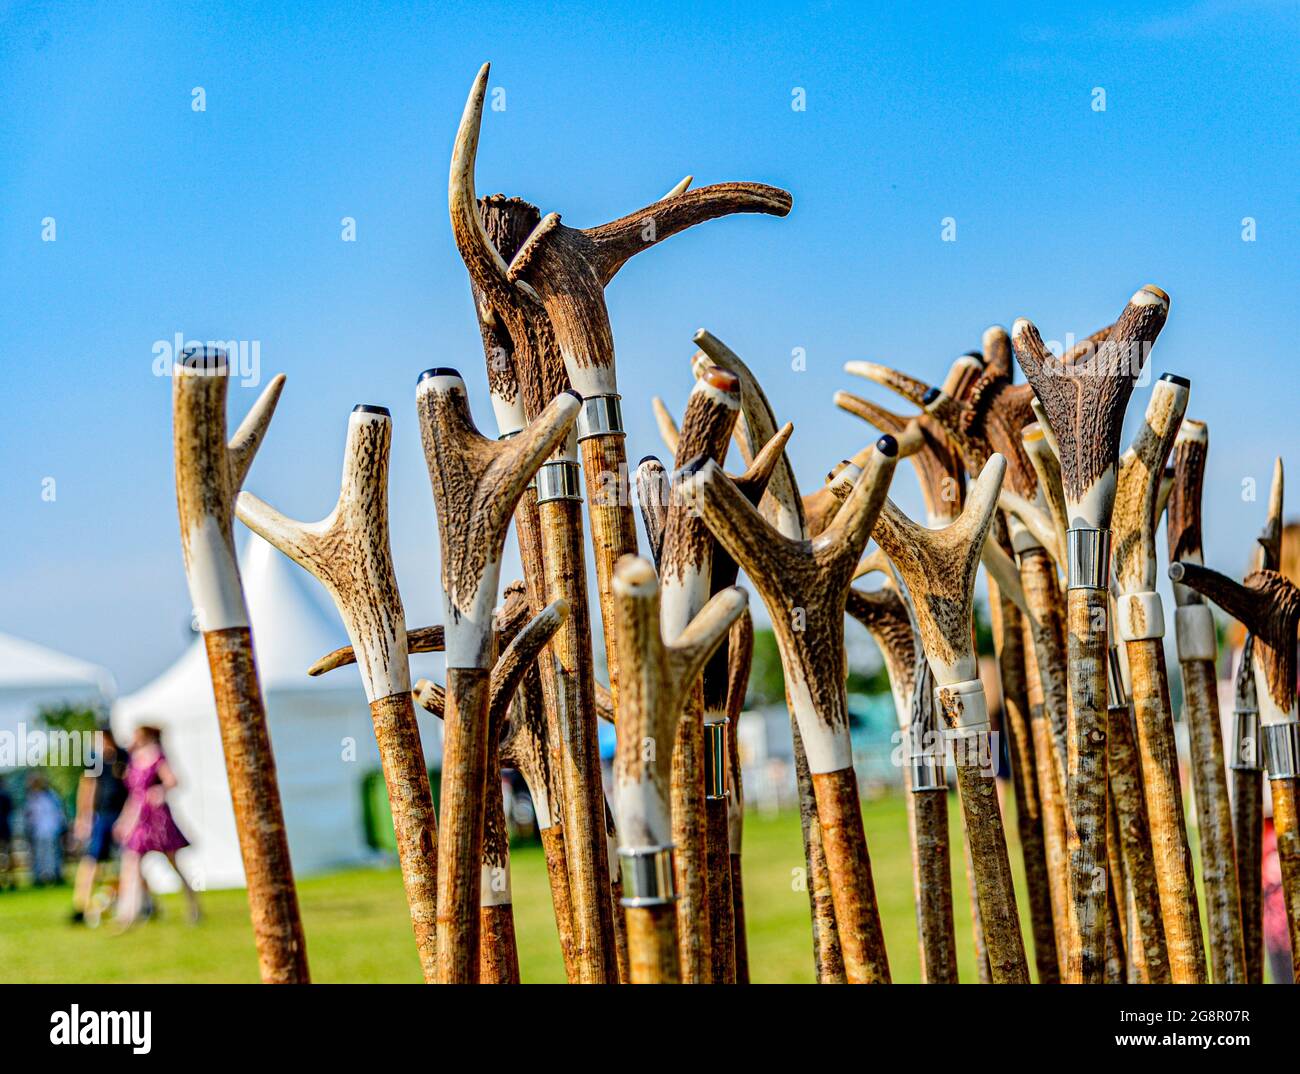 Walking sticks, in this case, thumbsticks, for sale at a country show with the top crafted from a deer's antler Stock Photo